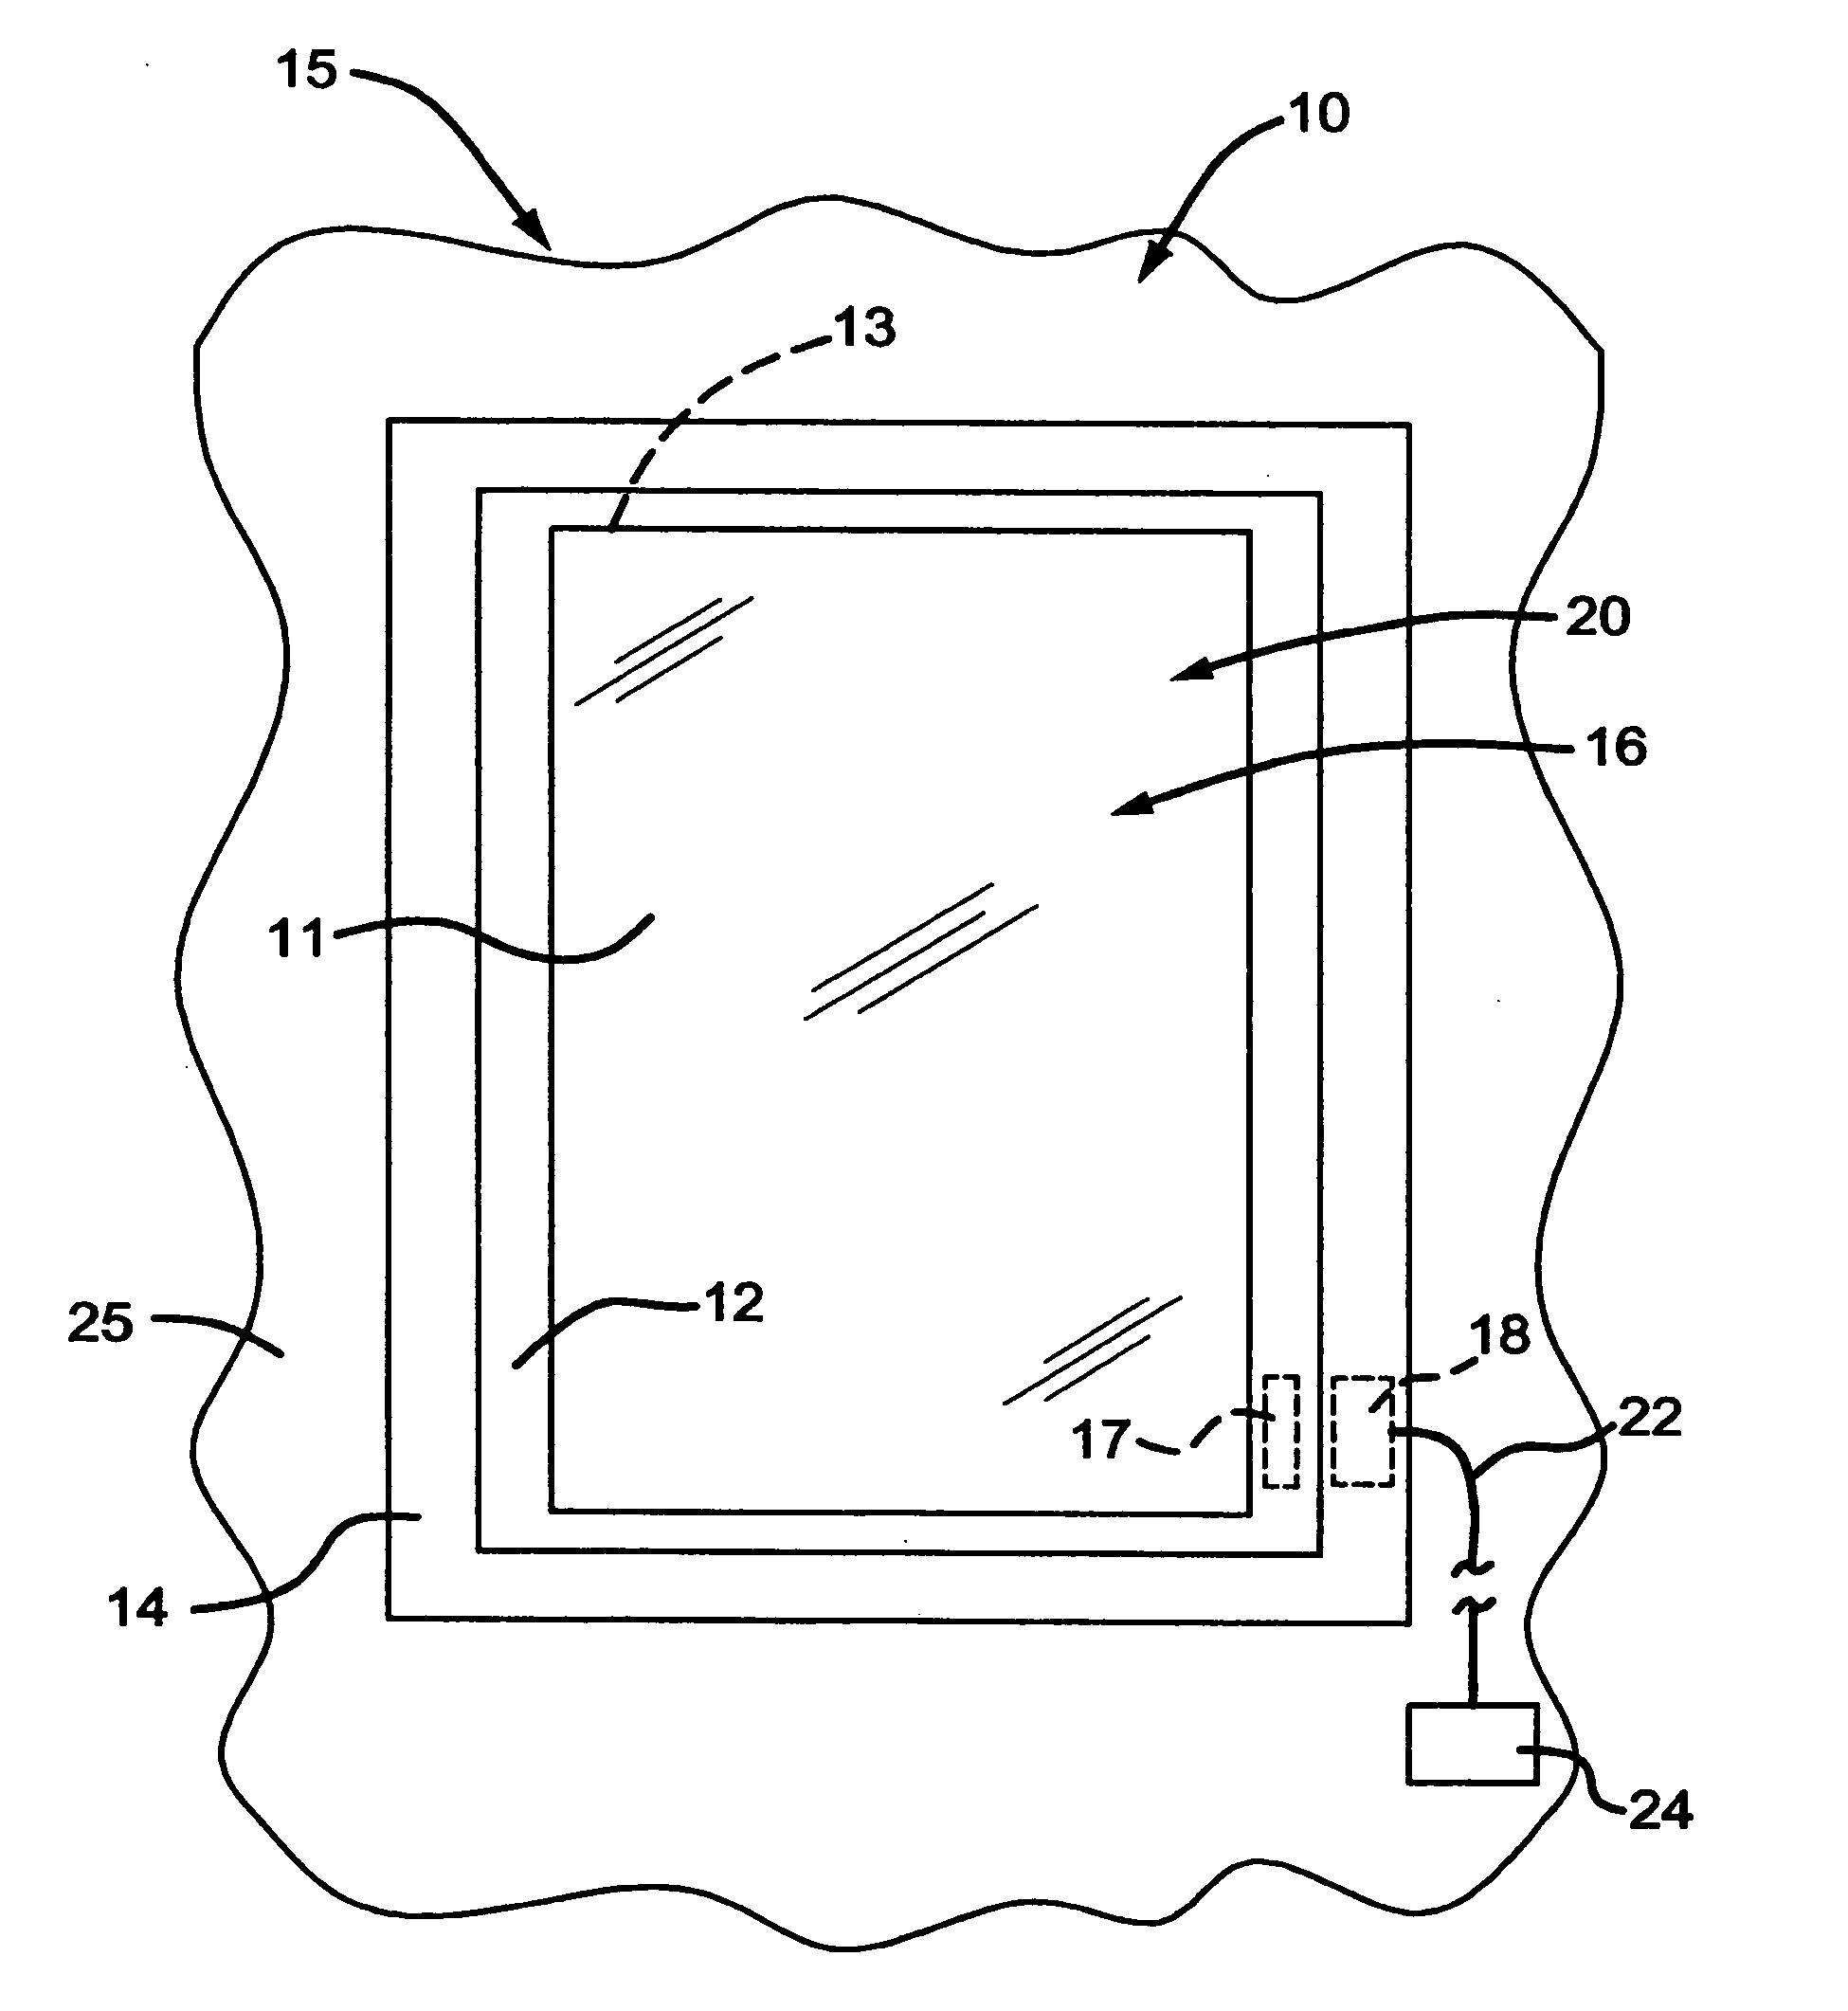 Wireless inductive coupling assembly for a heated glass panel